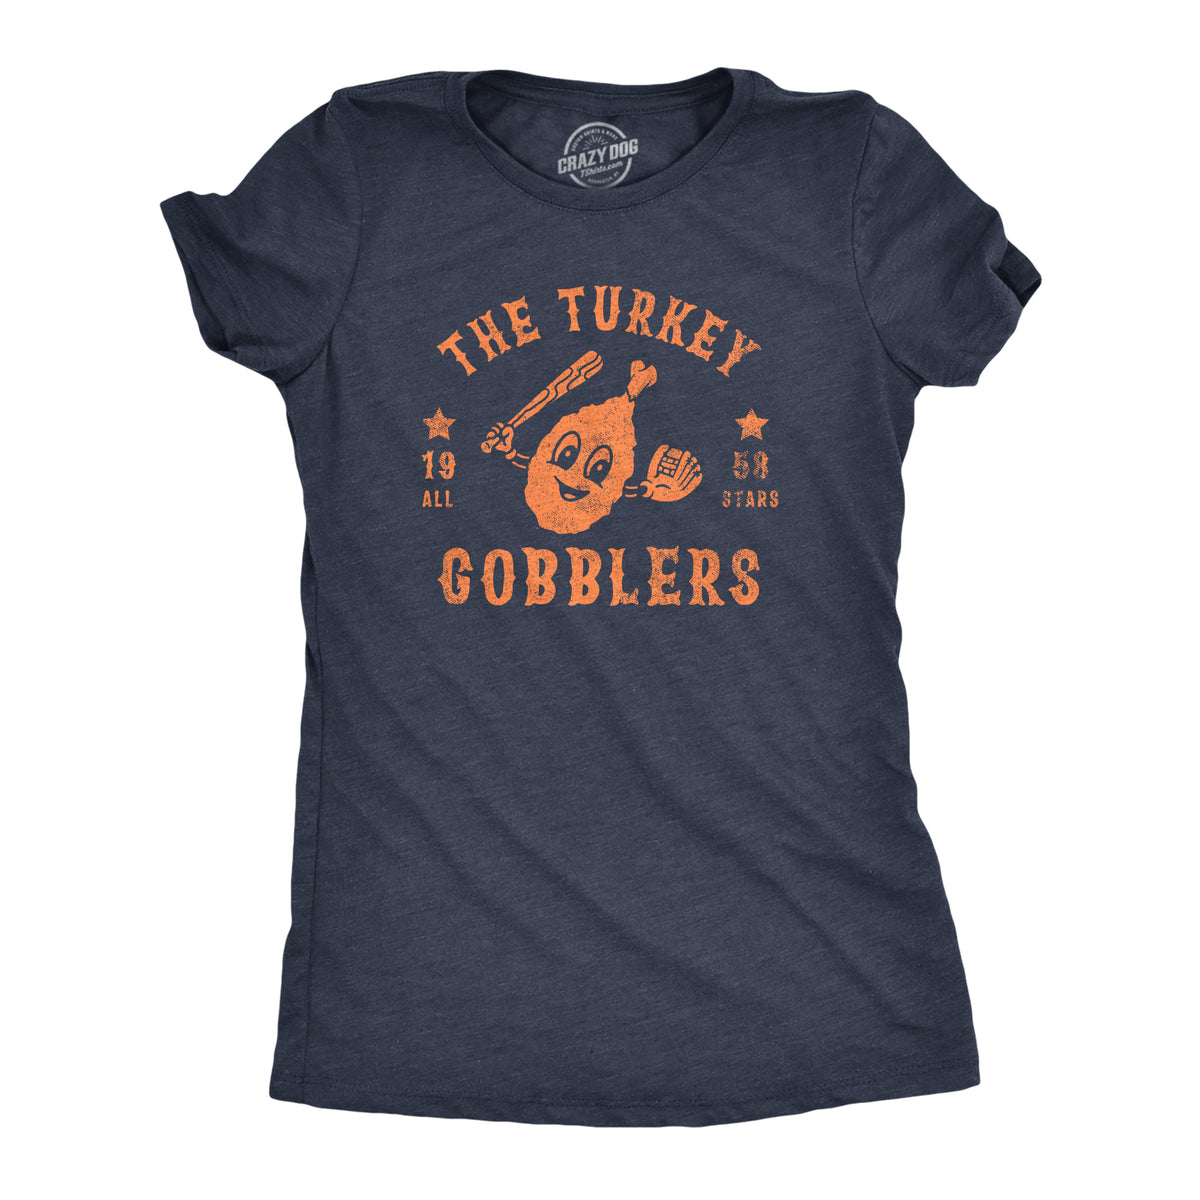 Funny Heather Navy - GOBBLERS The Turkey Gobblers All Stars Womens T Shirt Nerdy Thanksgiving Baseball Tee